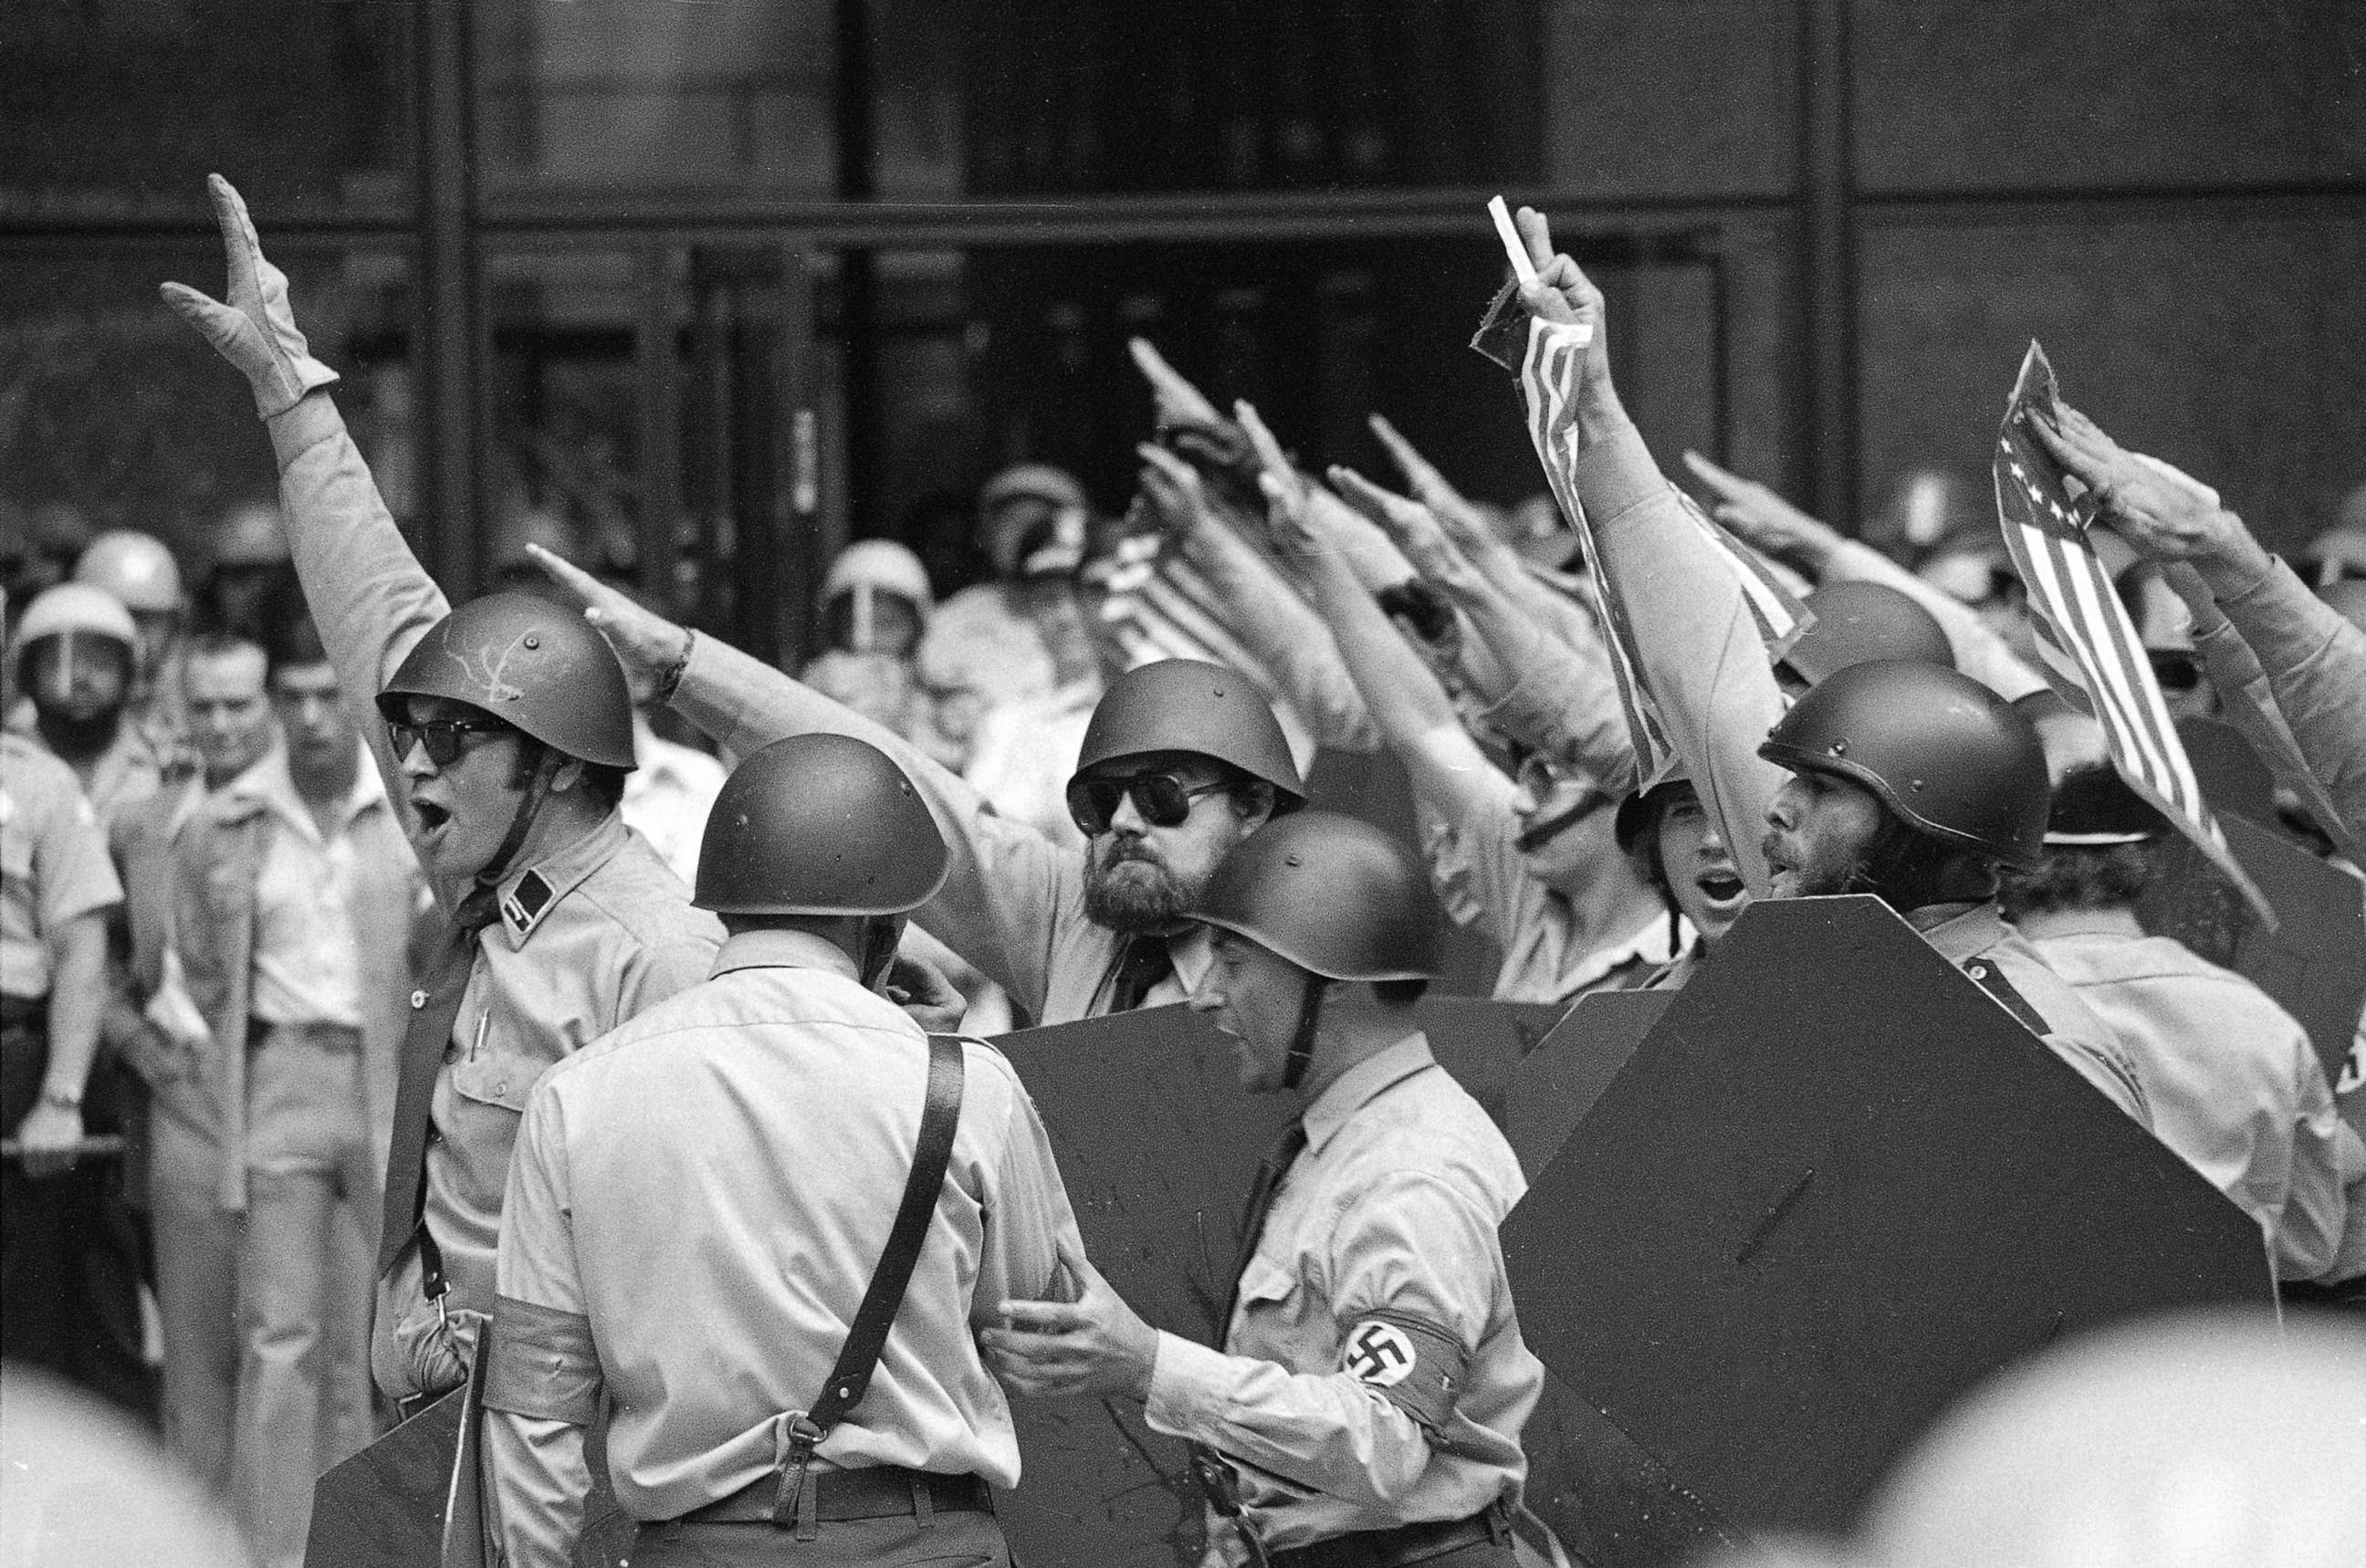 PHOTO: Nazi leader Frank Collin, pictured center, with the swastika armband leads helmeted members of the National Socialist Party of America give the Fascist salute during a rally in downtown Chicago, June 24, 1978.